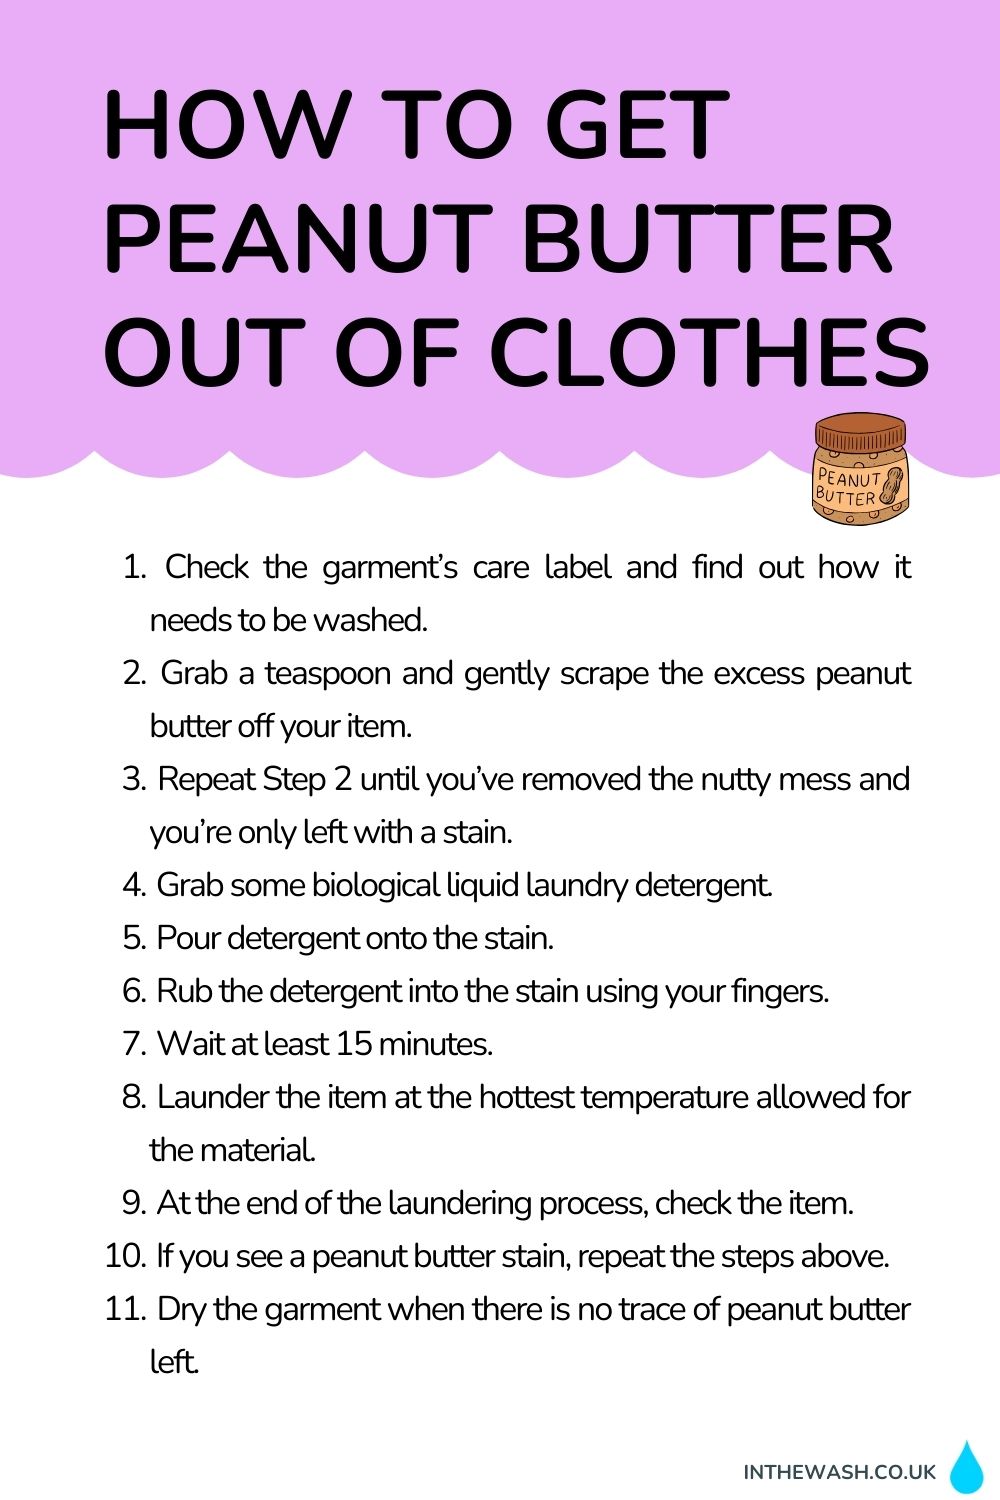 How to get peanut butter out of clothes